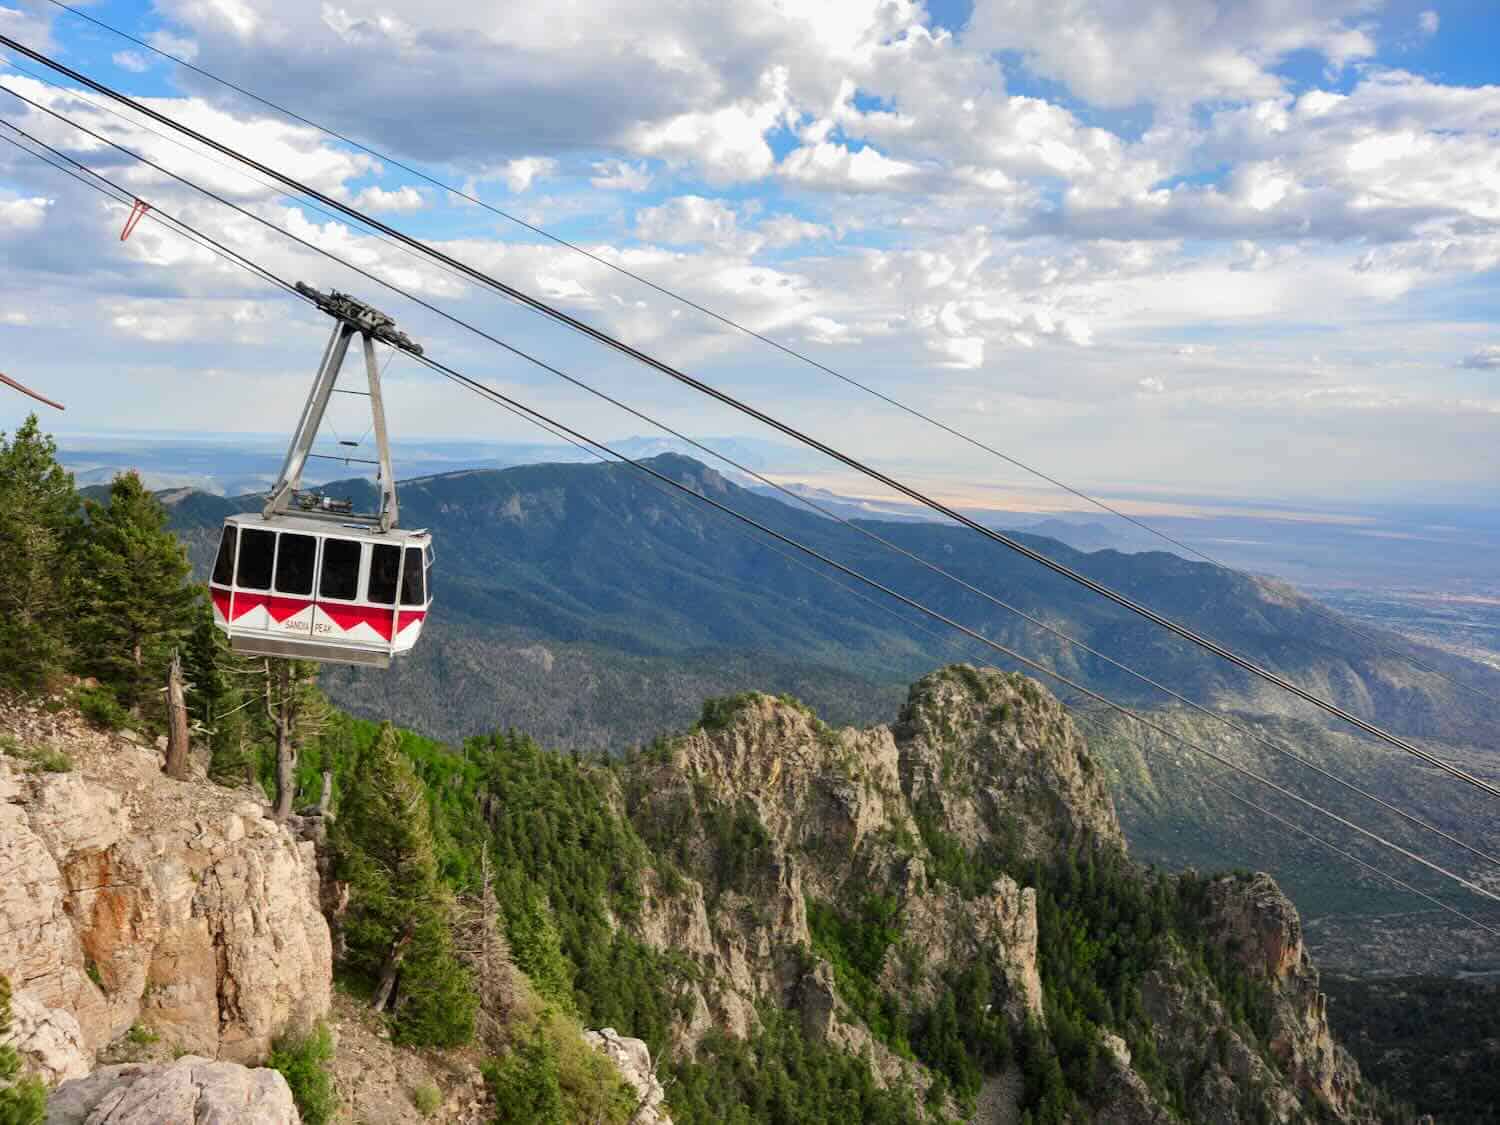 Riding the Sandia Peak Tramway is a fun outdoor thing to do in Albuquerque NM.